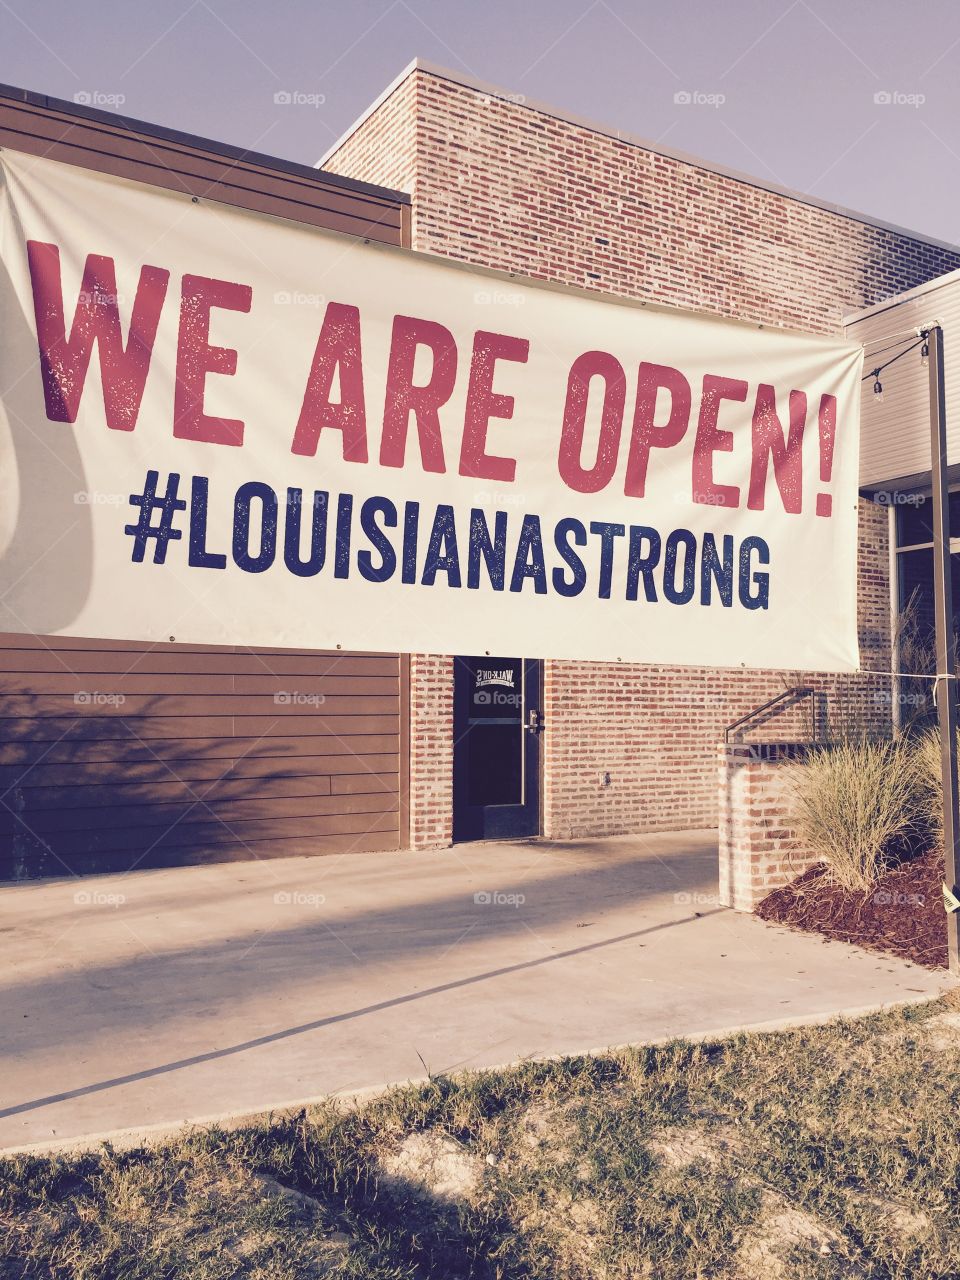 Louisiana  Sign after the flood in August, Saying they are Strong.